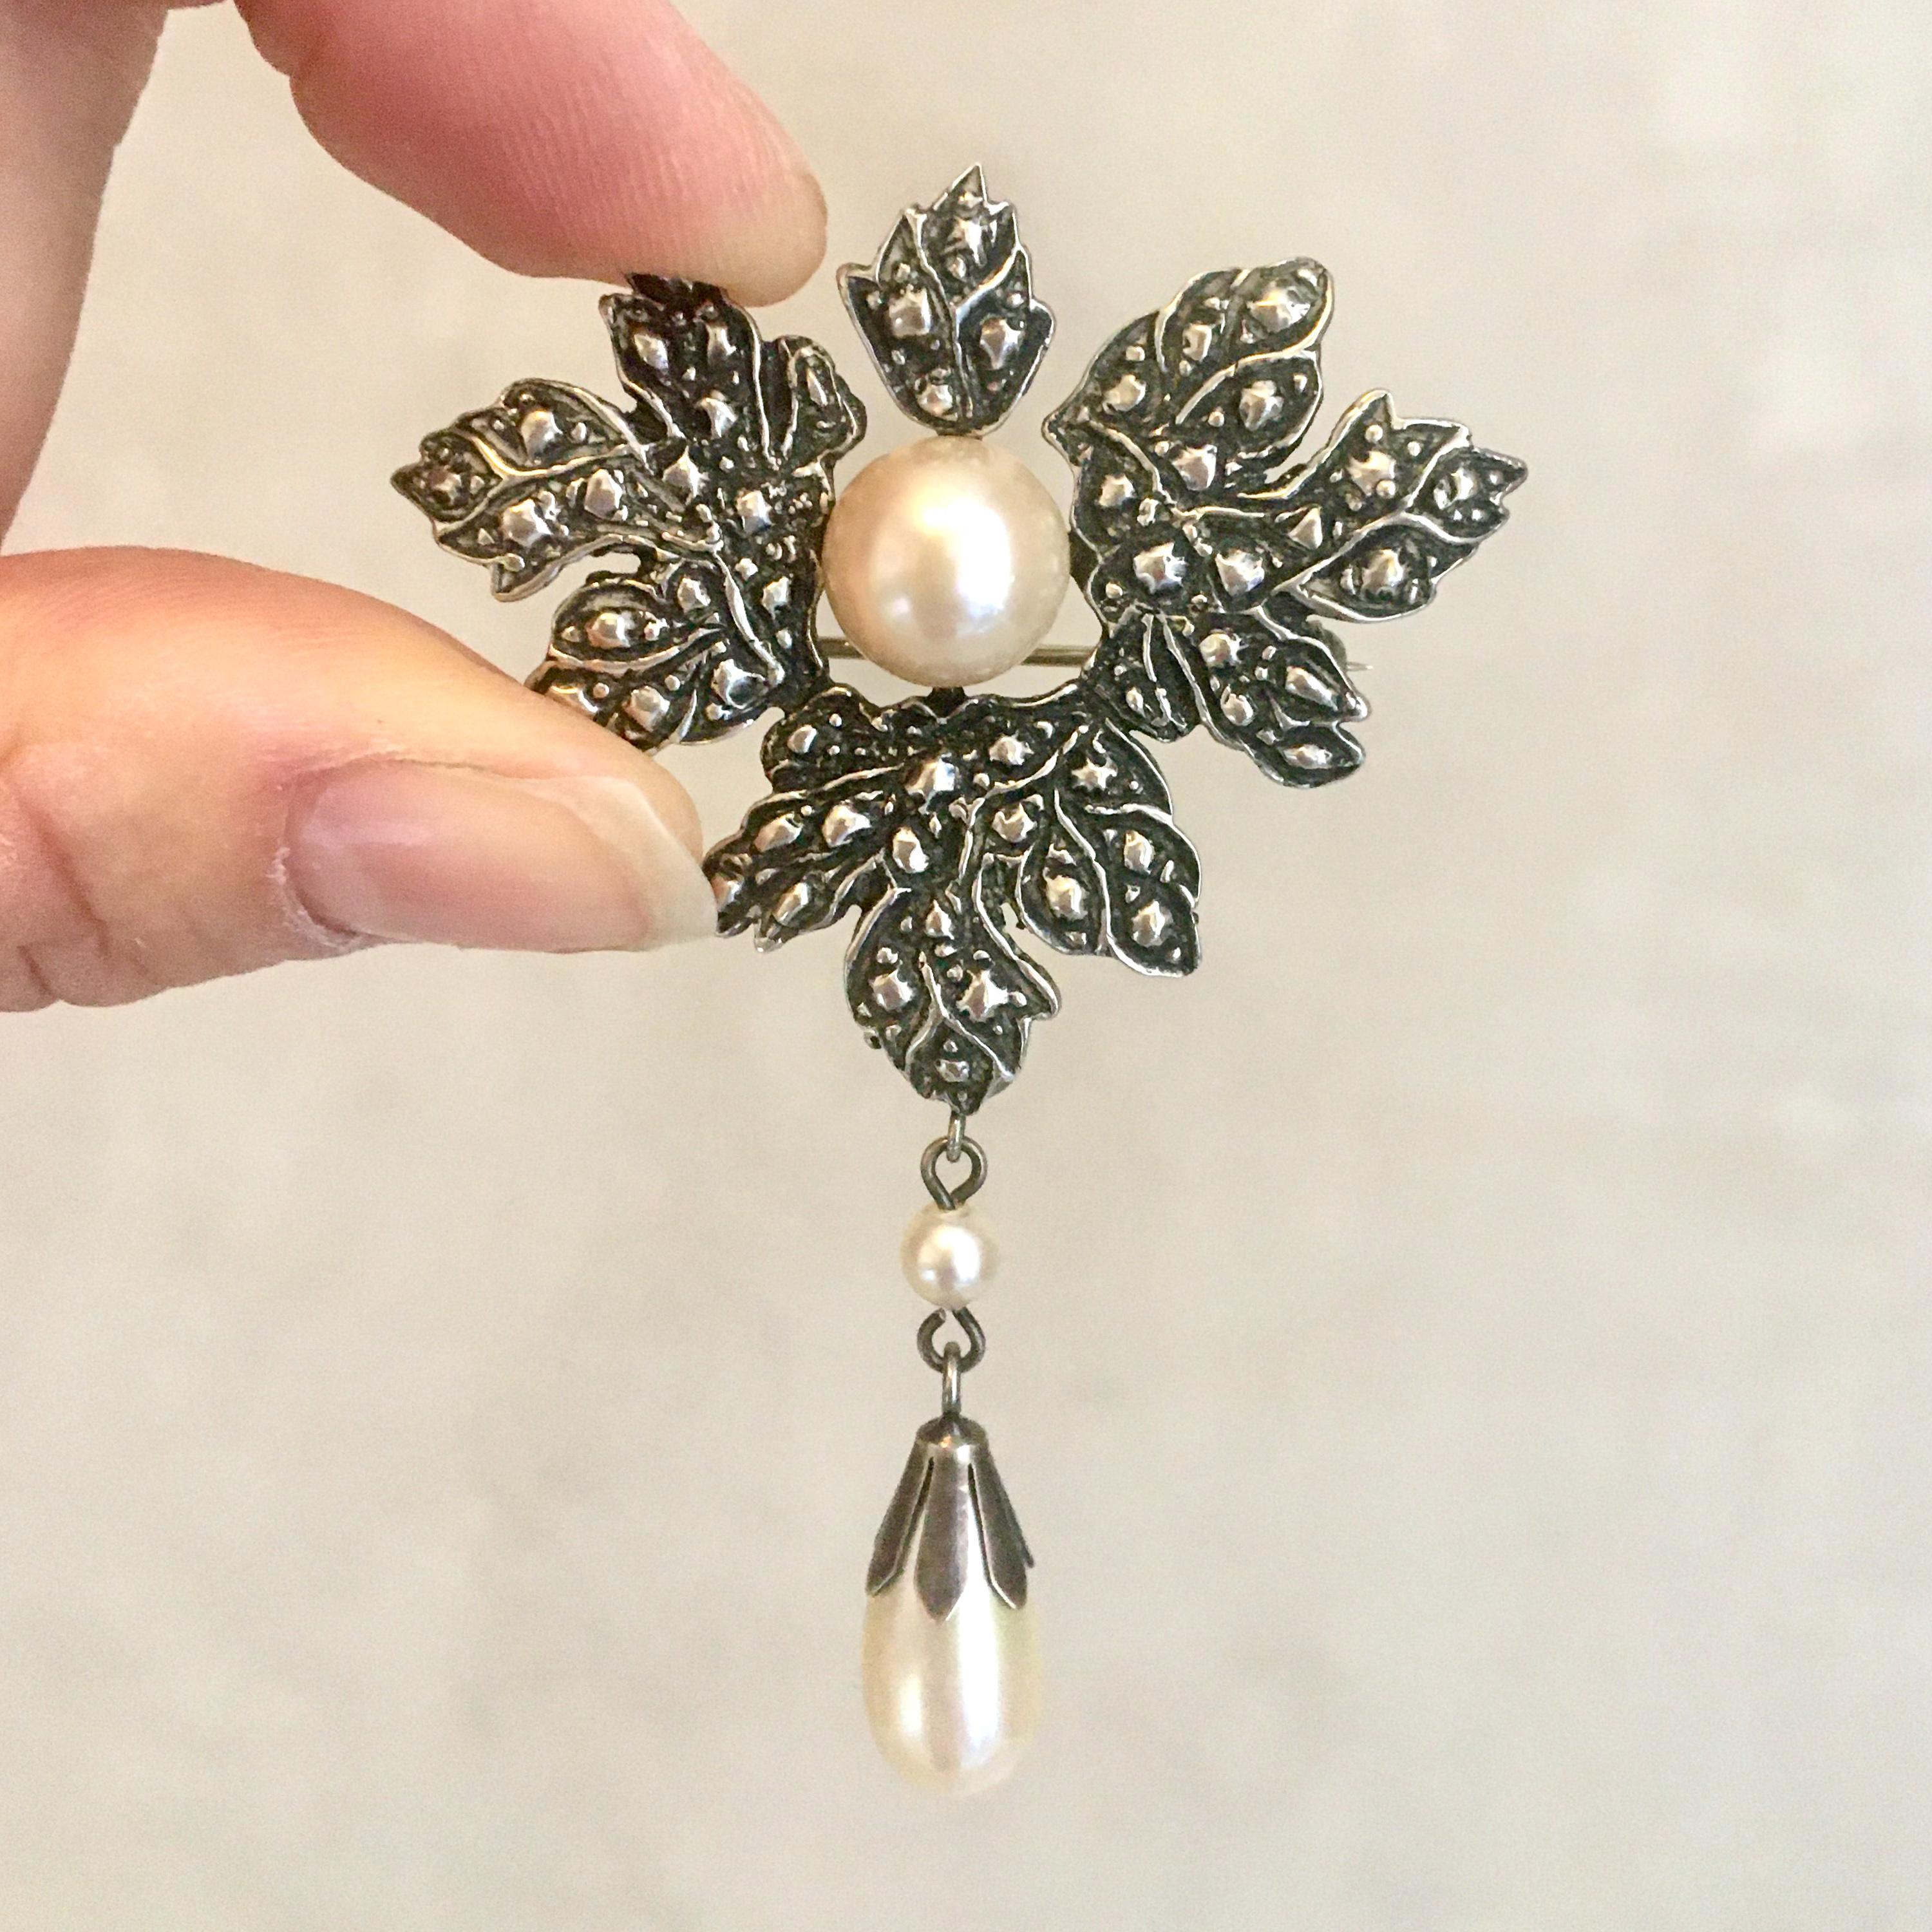 A Belle Epoque-style silver cultured pearl brooch. The silver is beautifully crafted in the shape of a maple leaf, leaves symbolize growth and letting go. The brooch consists of a center pearl, surrounded by a silver maple leaf and a pendant pearl.